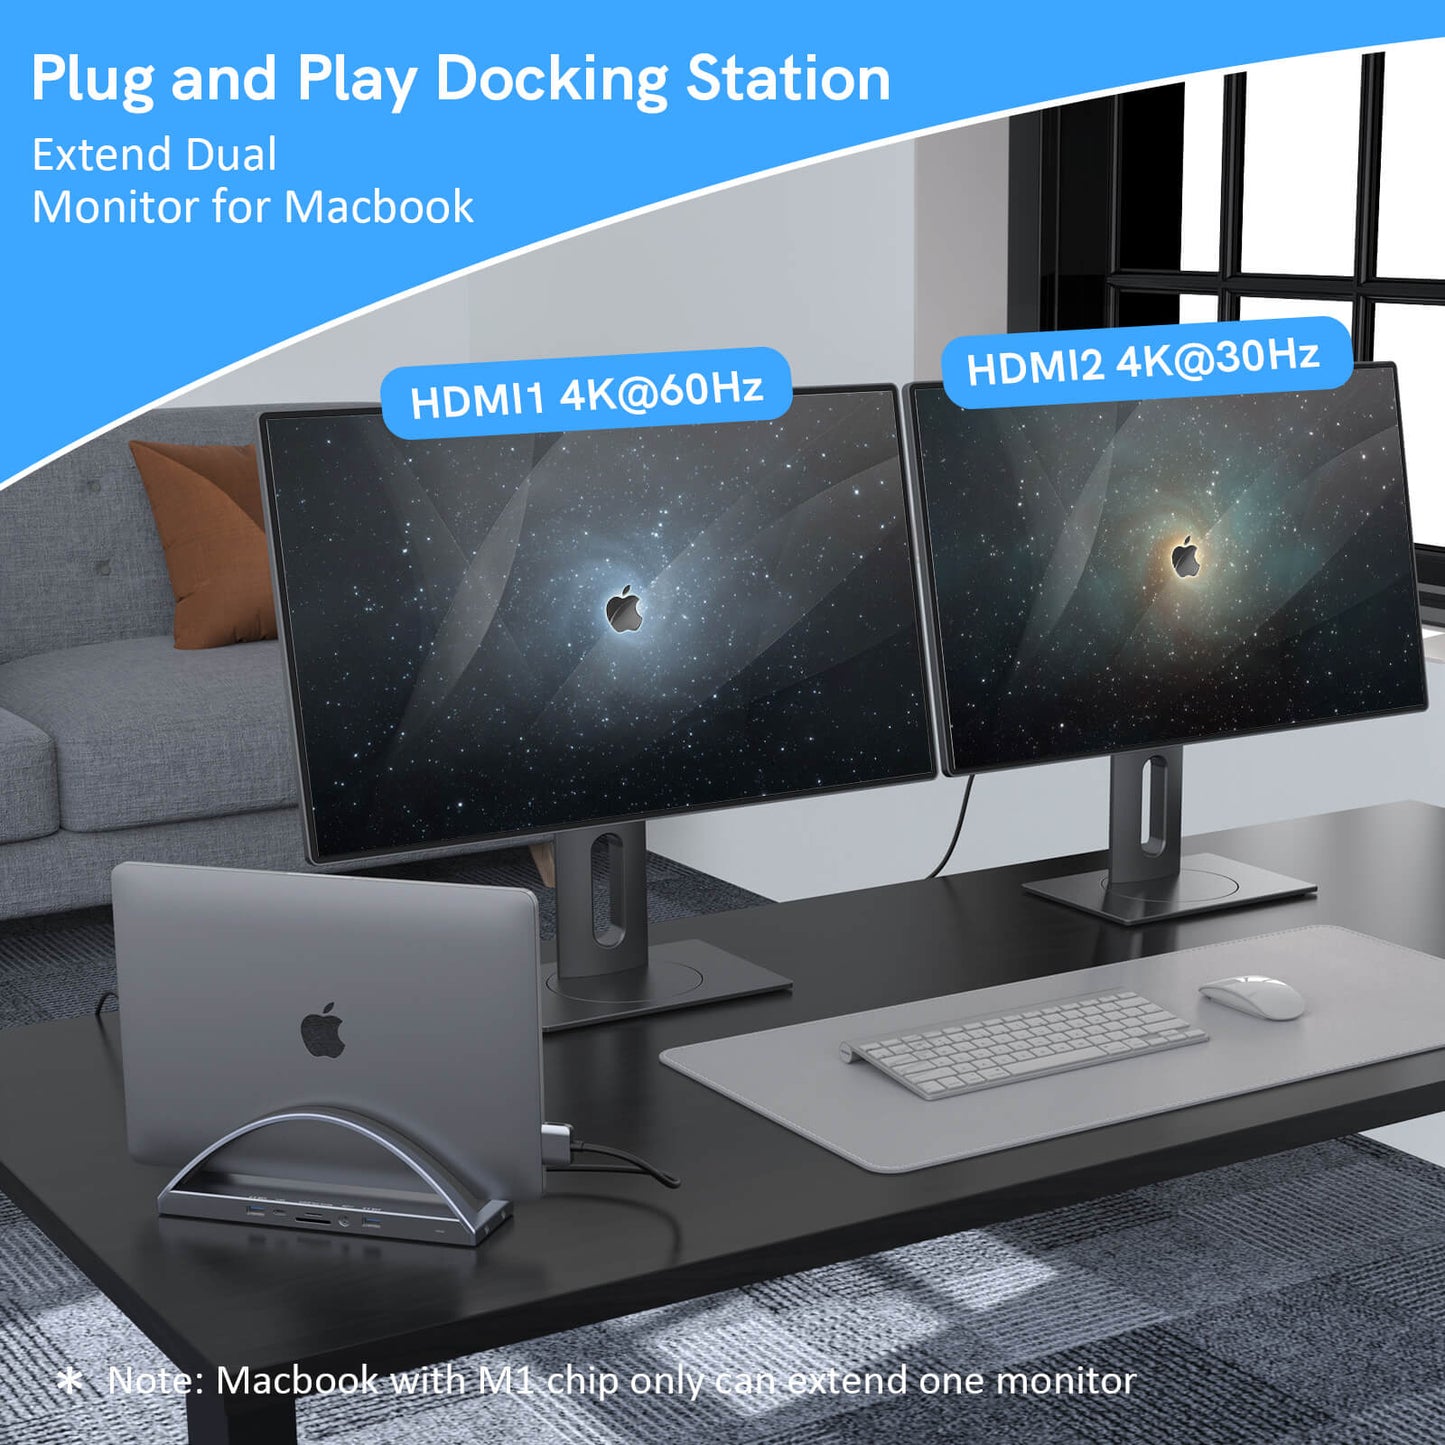 Plug and Play ZC01 dock stand extend dual monitor for MacBook